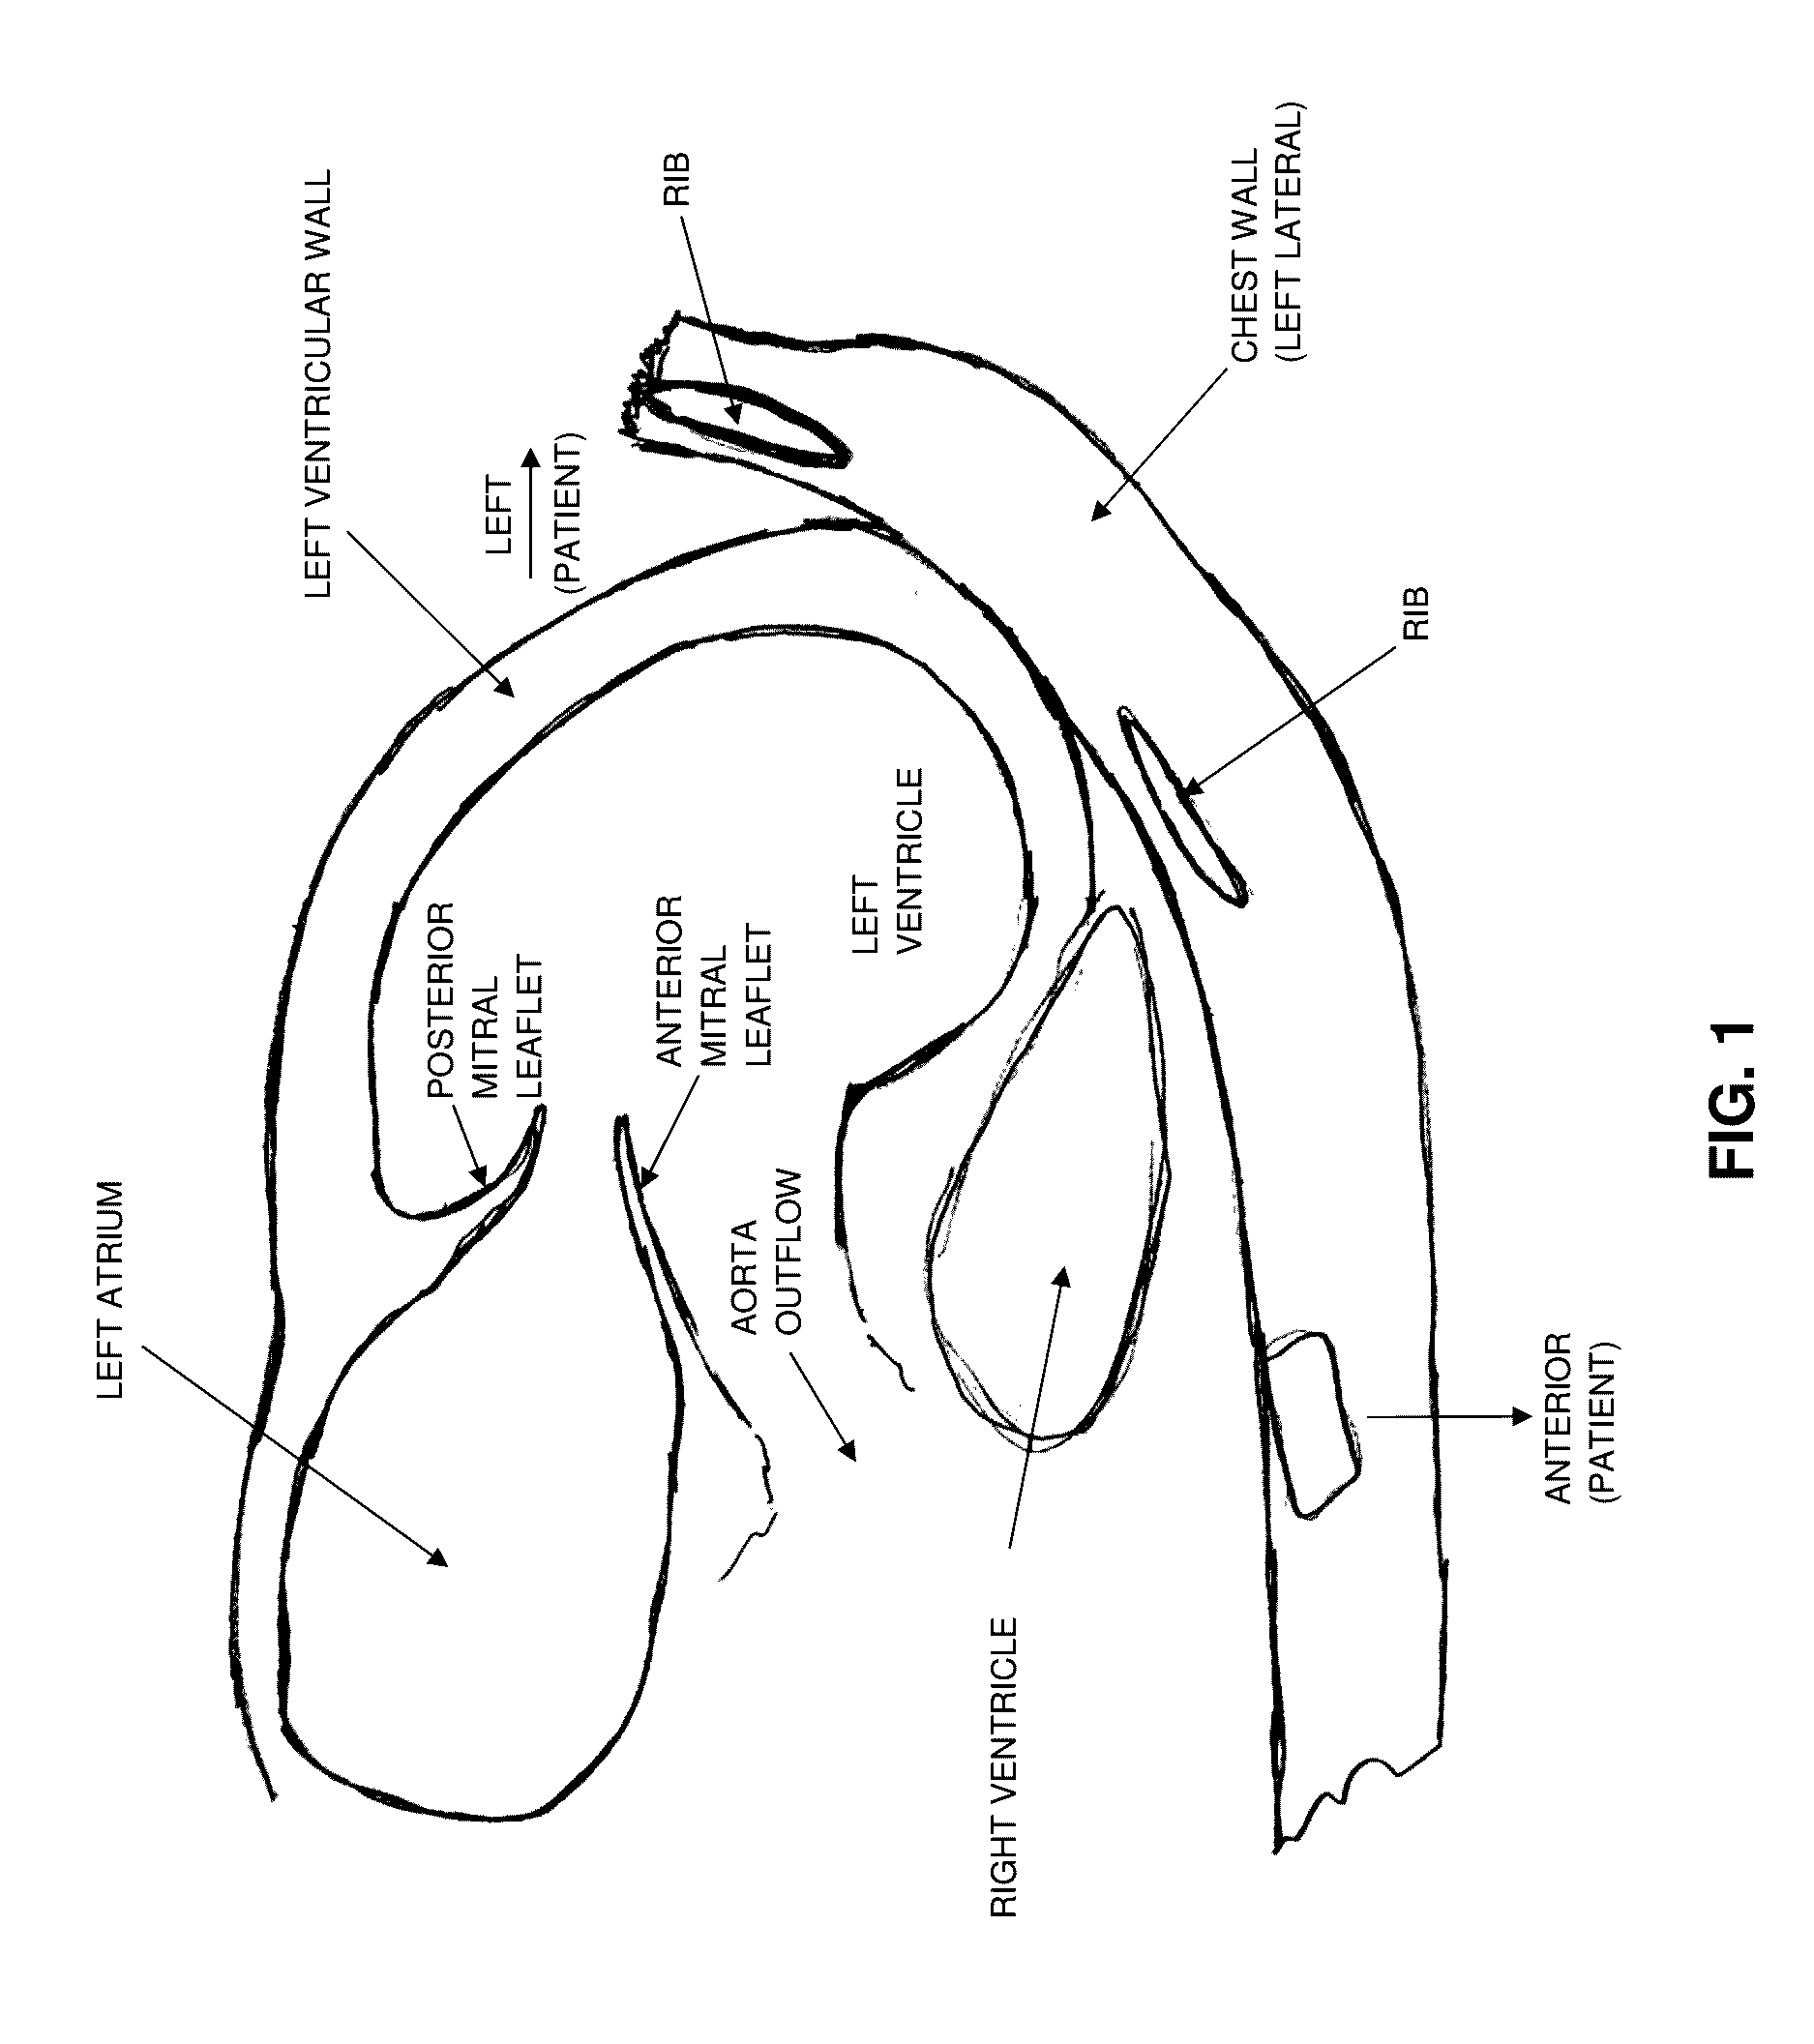 Method and apparatus for repairing a mitral valve